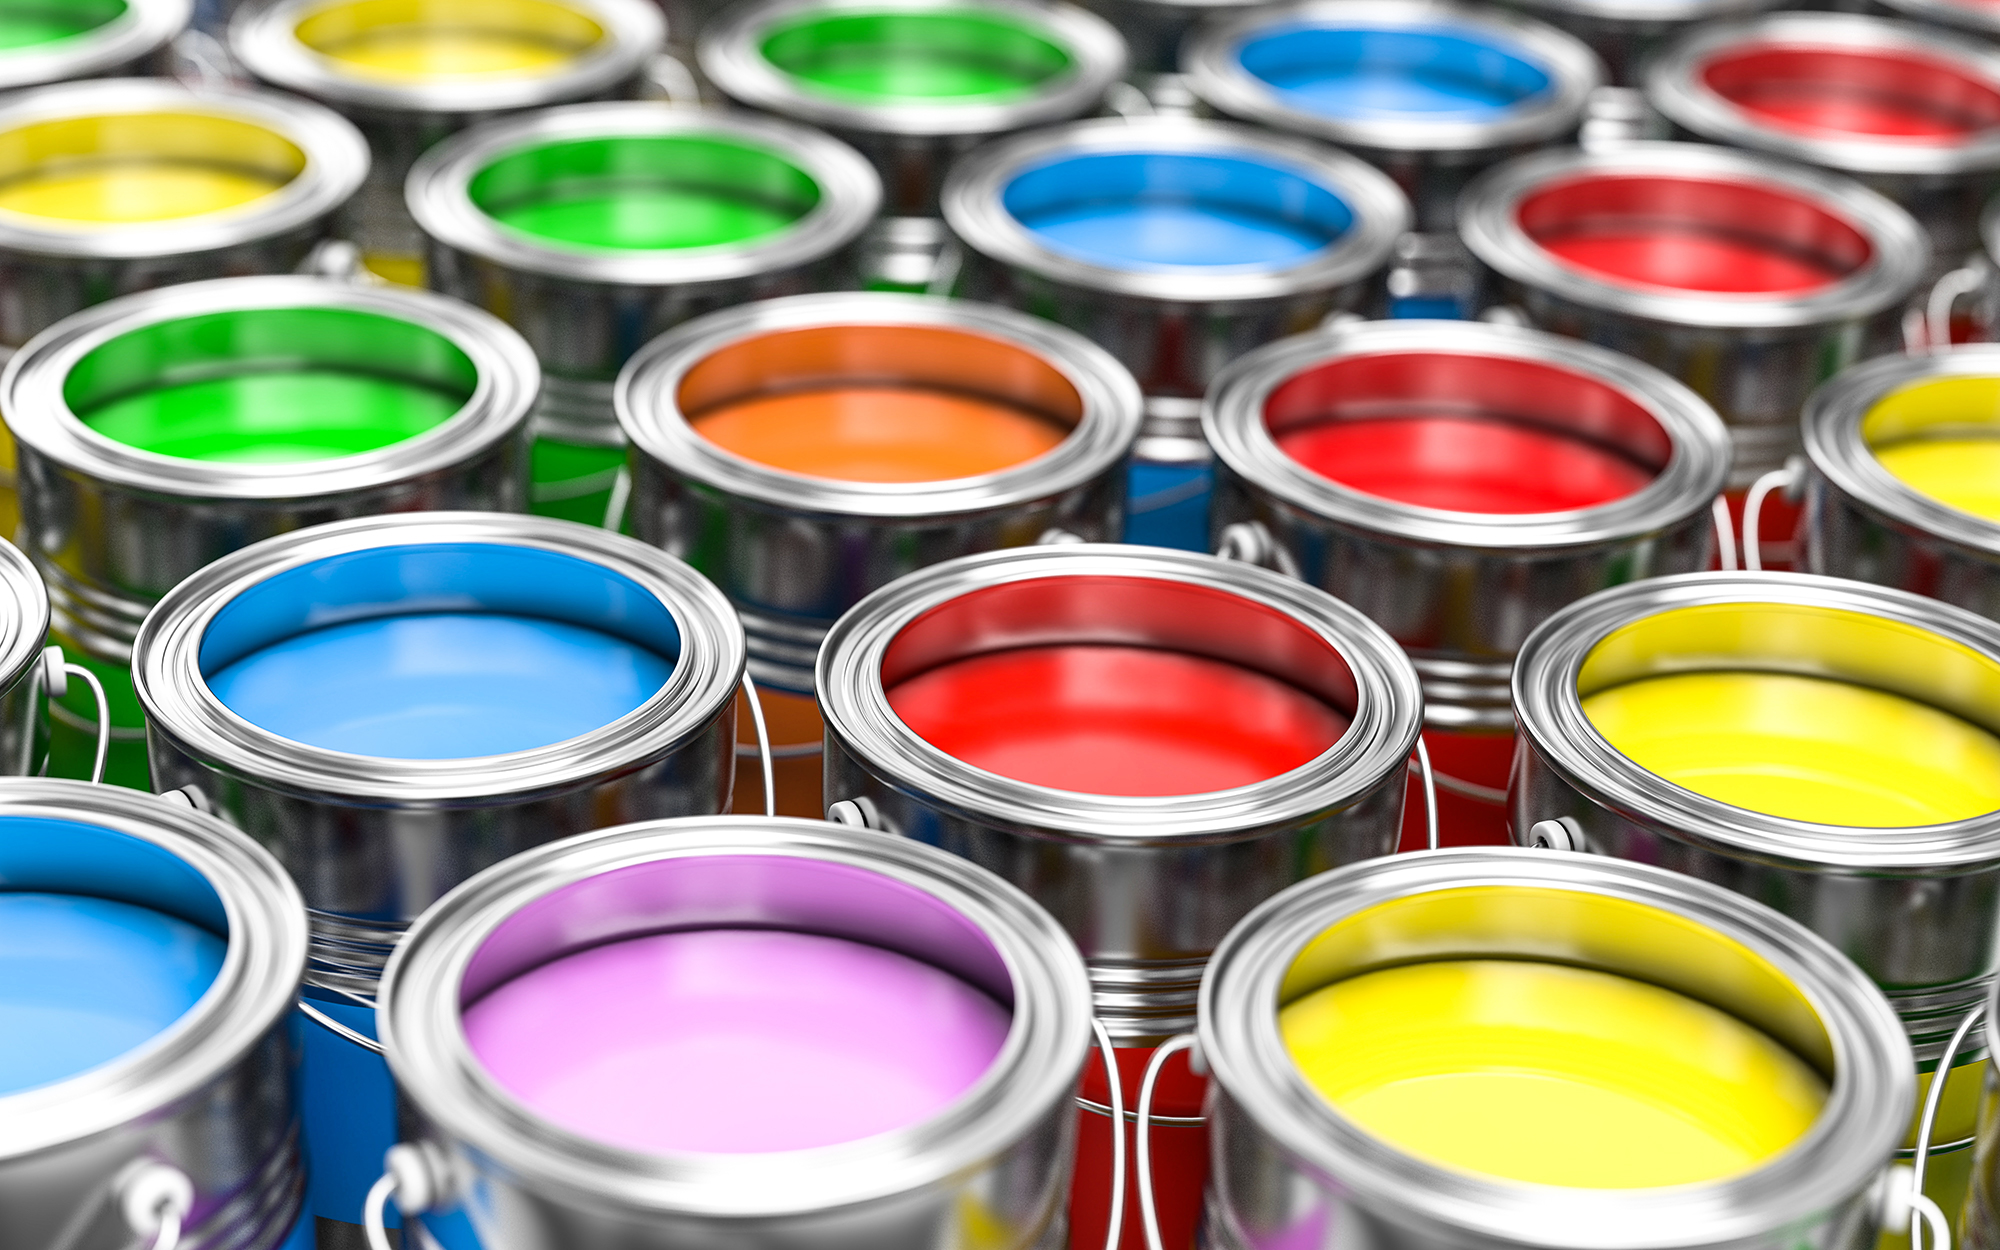 Process technology knowledge in paints and coatings